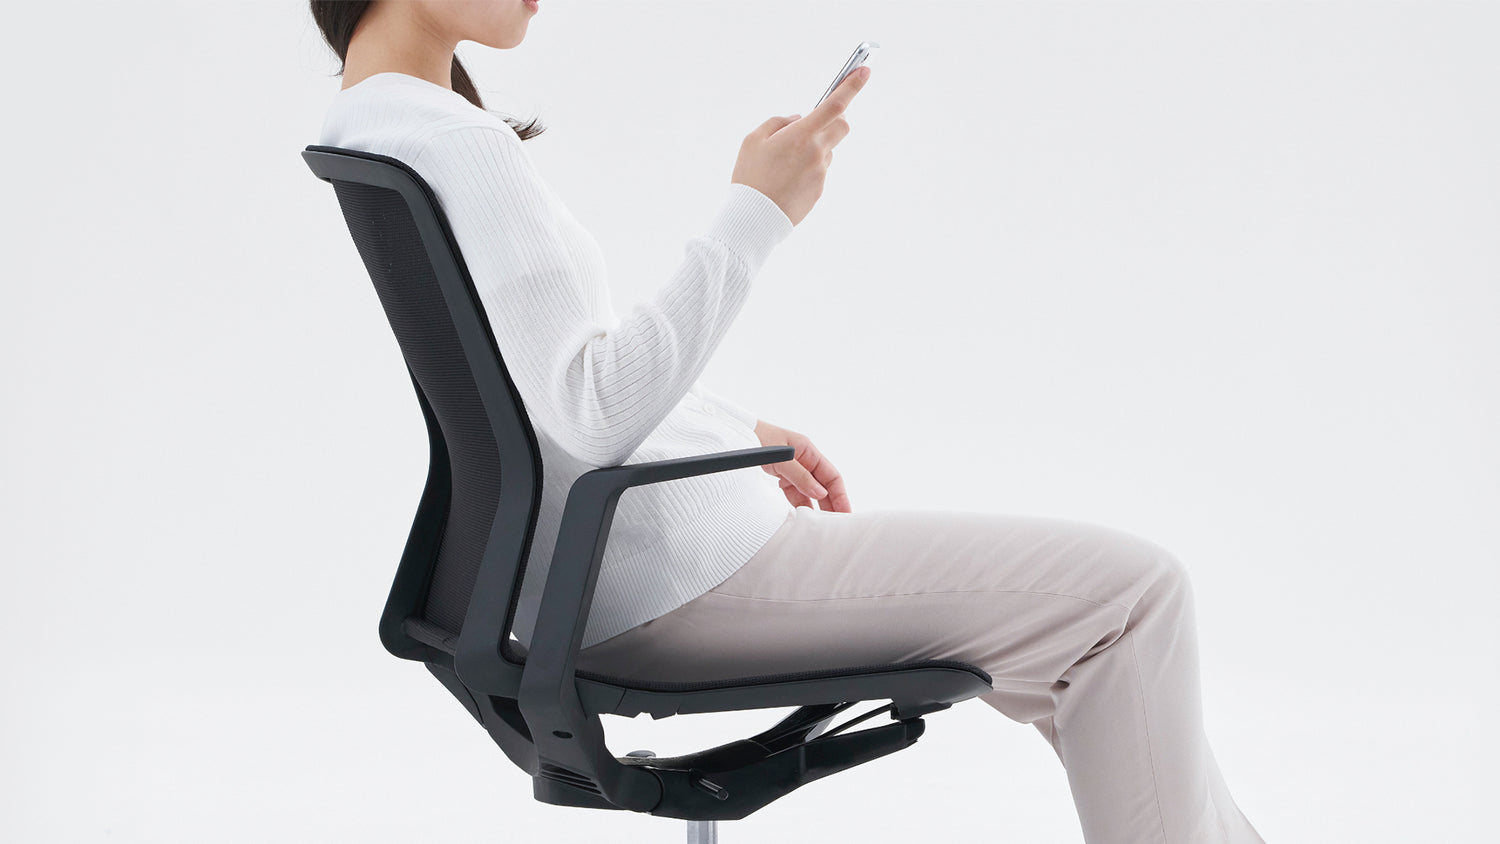 6 Office Chair Features to Improve Sitting Posture (Part 2)